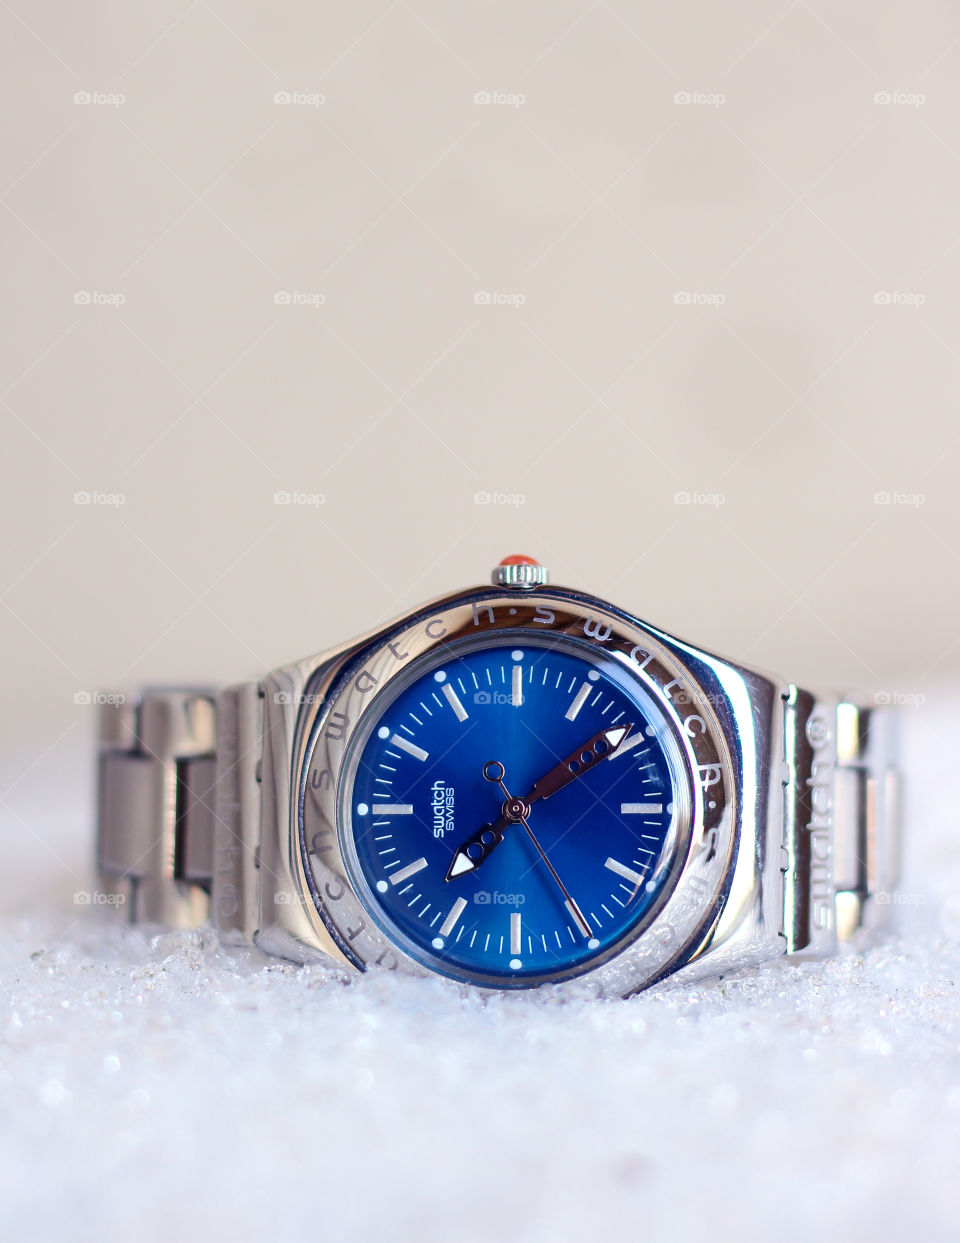 Swatch ladies wrist watch with blue dial